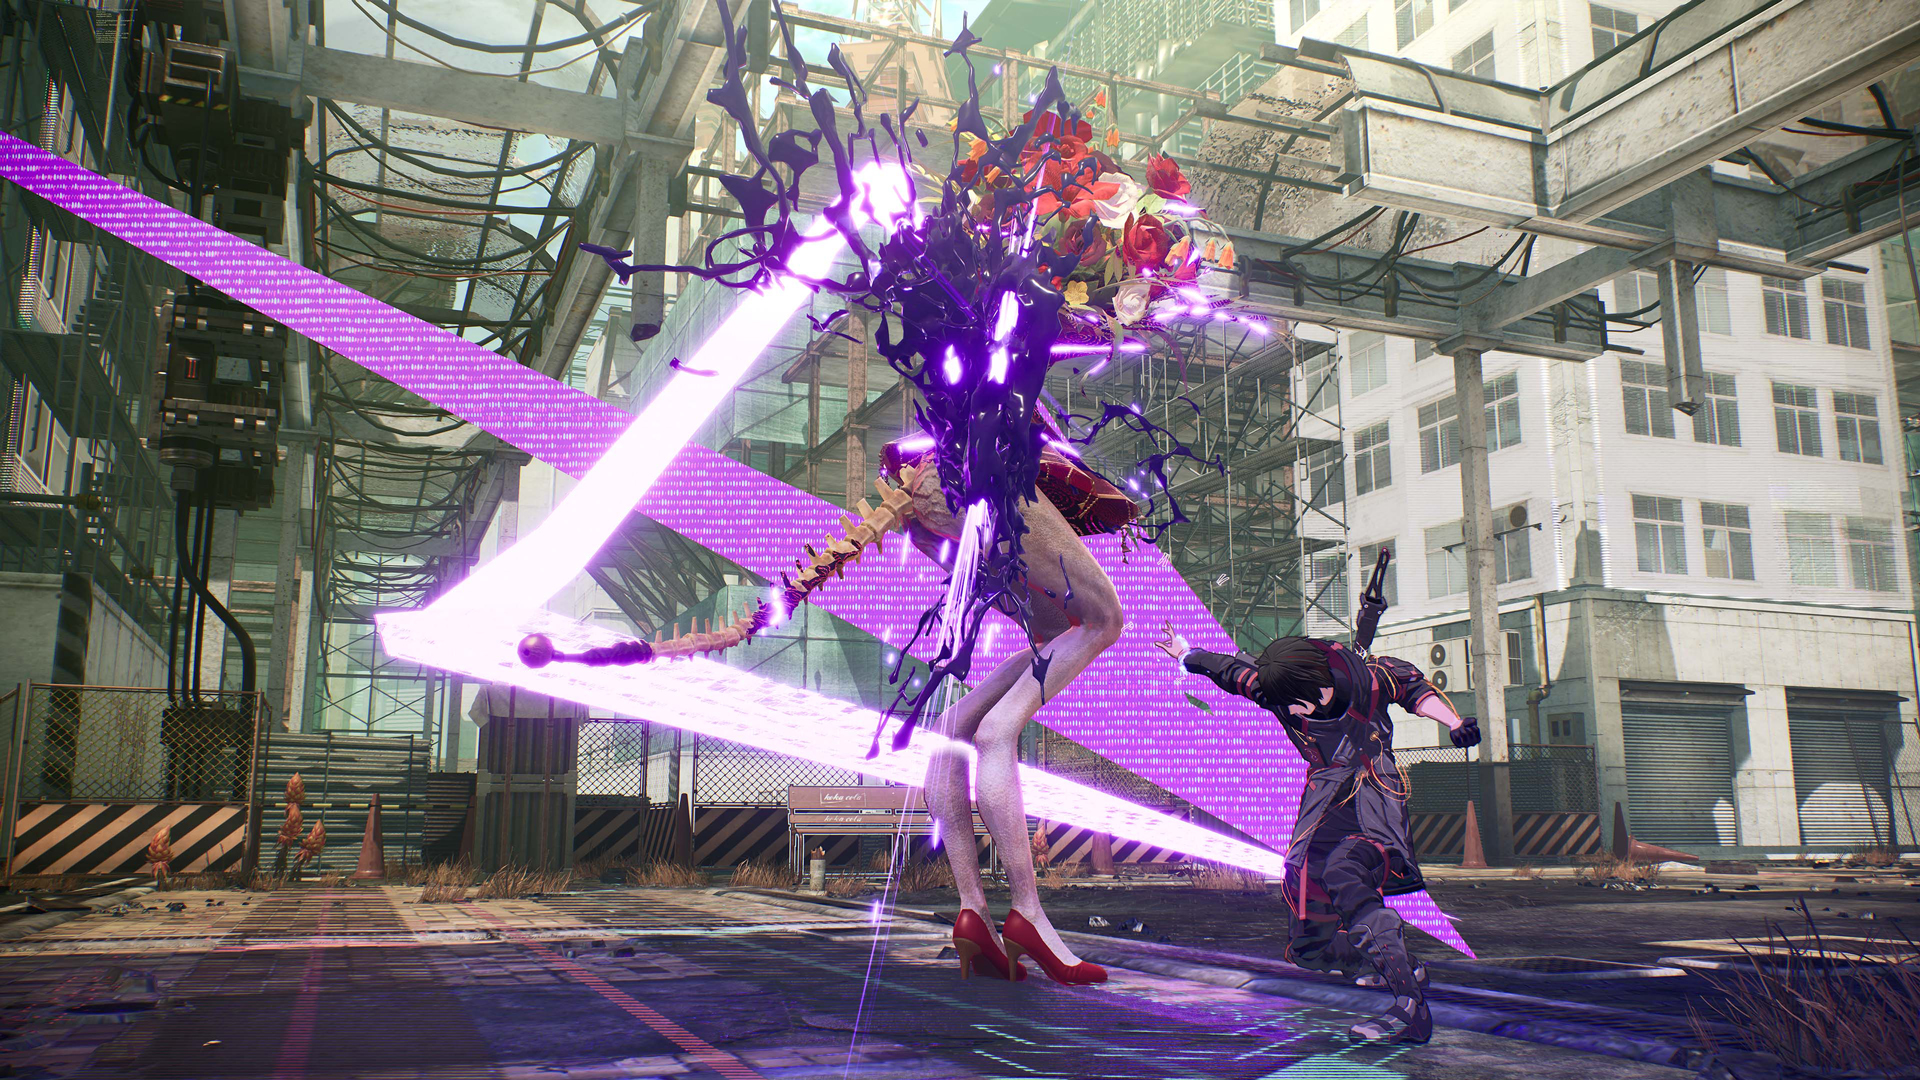 Scarlet Nexus Demo Now Available on PlayStation 4 and PlayStation 5